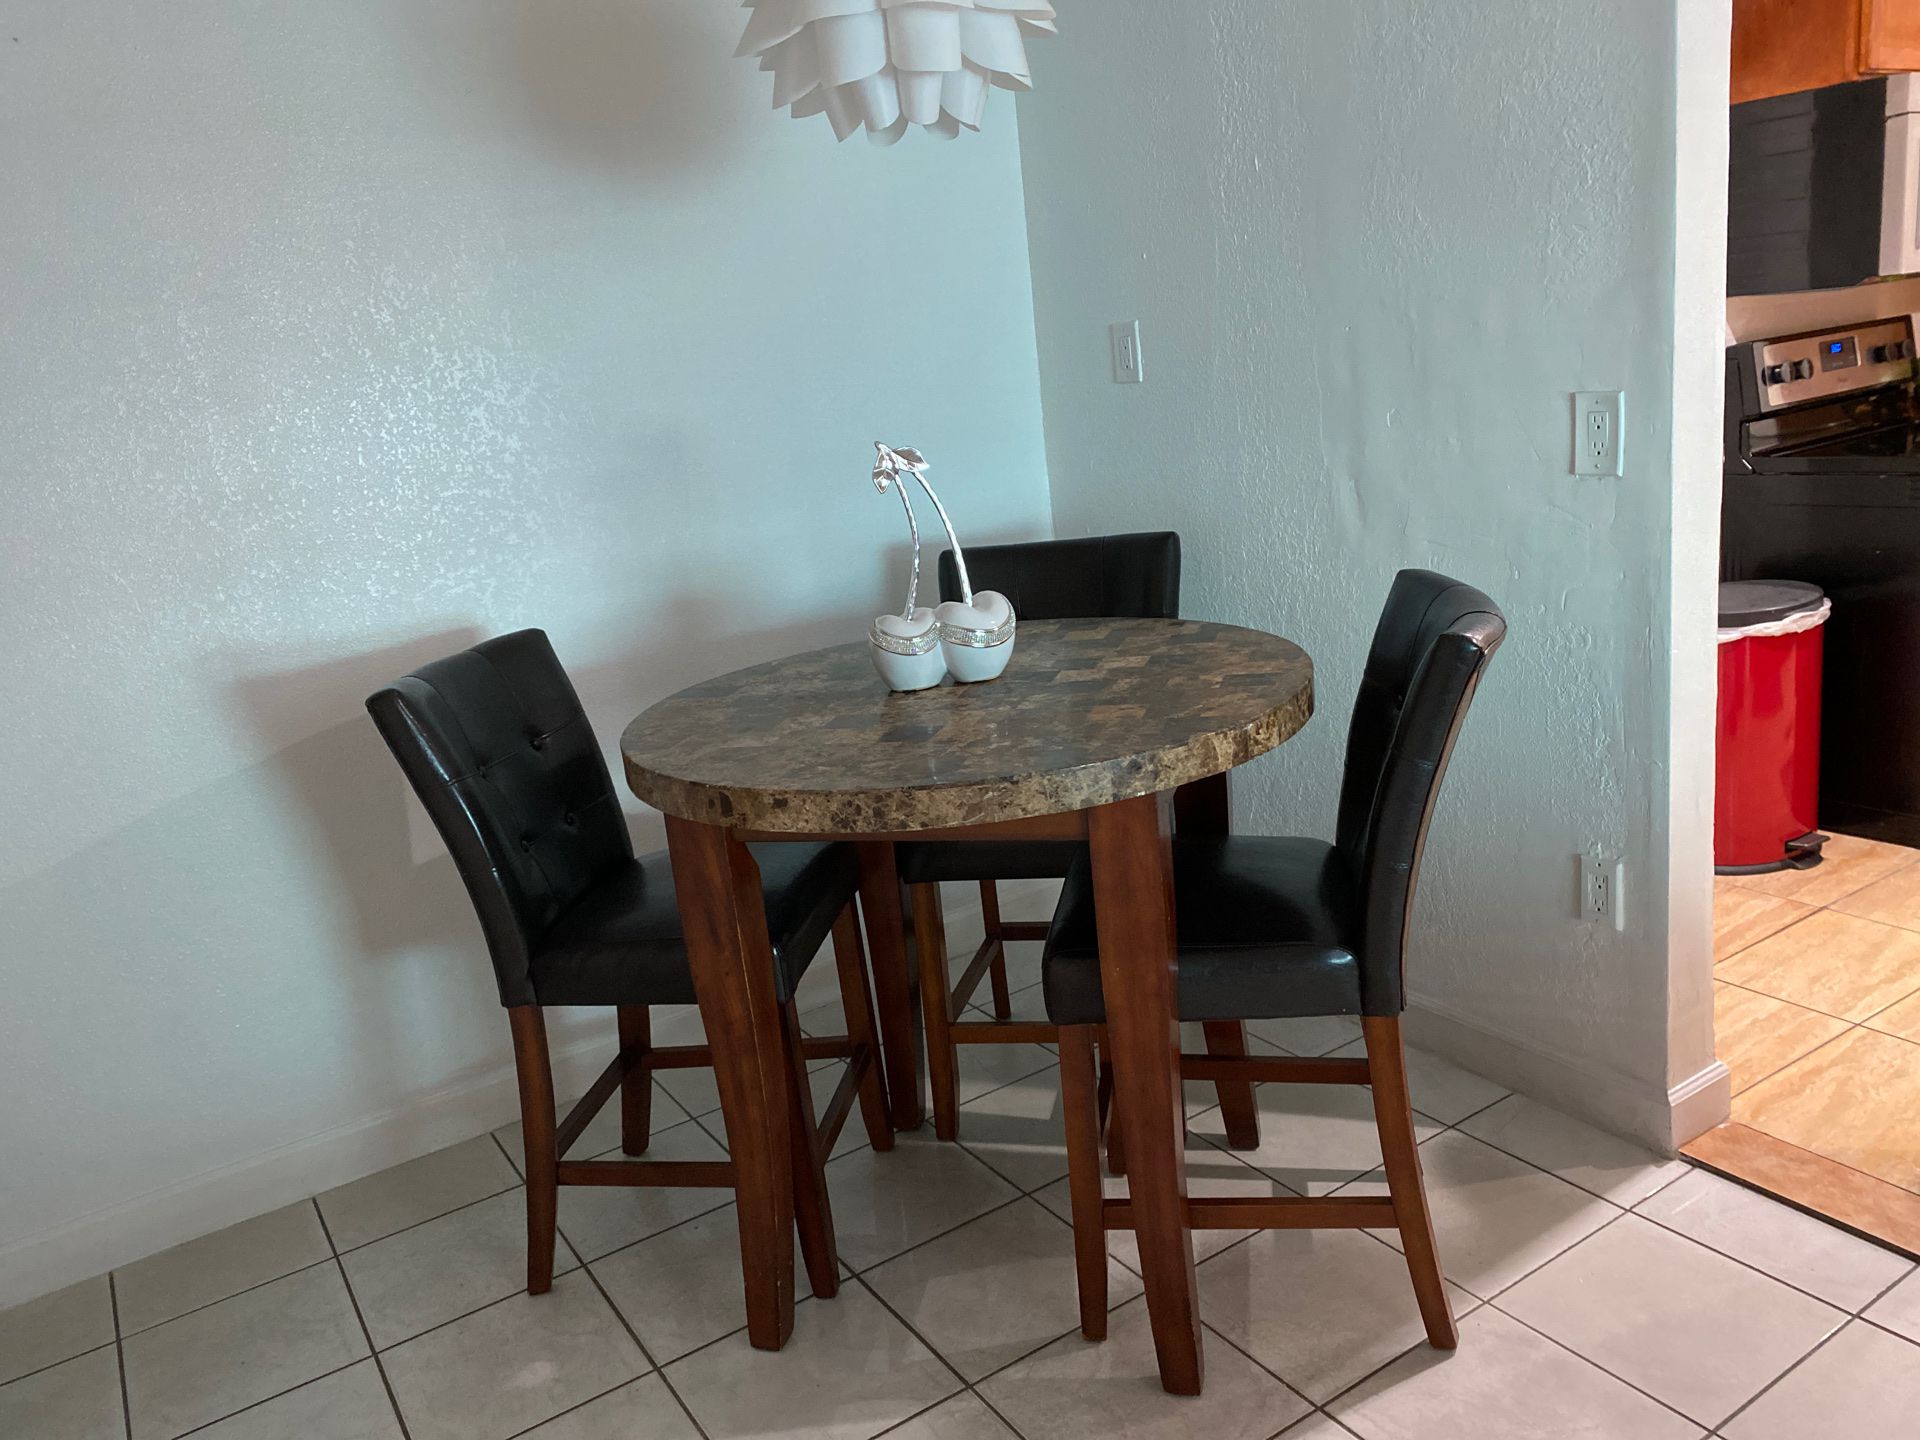 Marble top kitchen table with three chairs